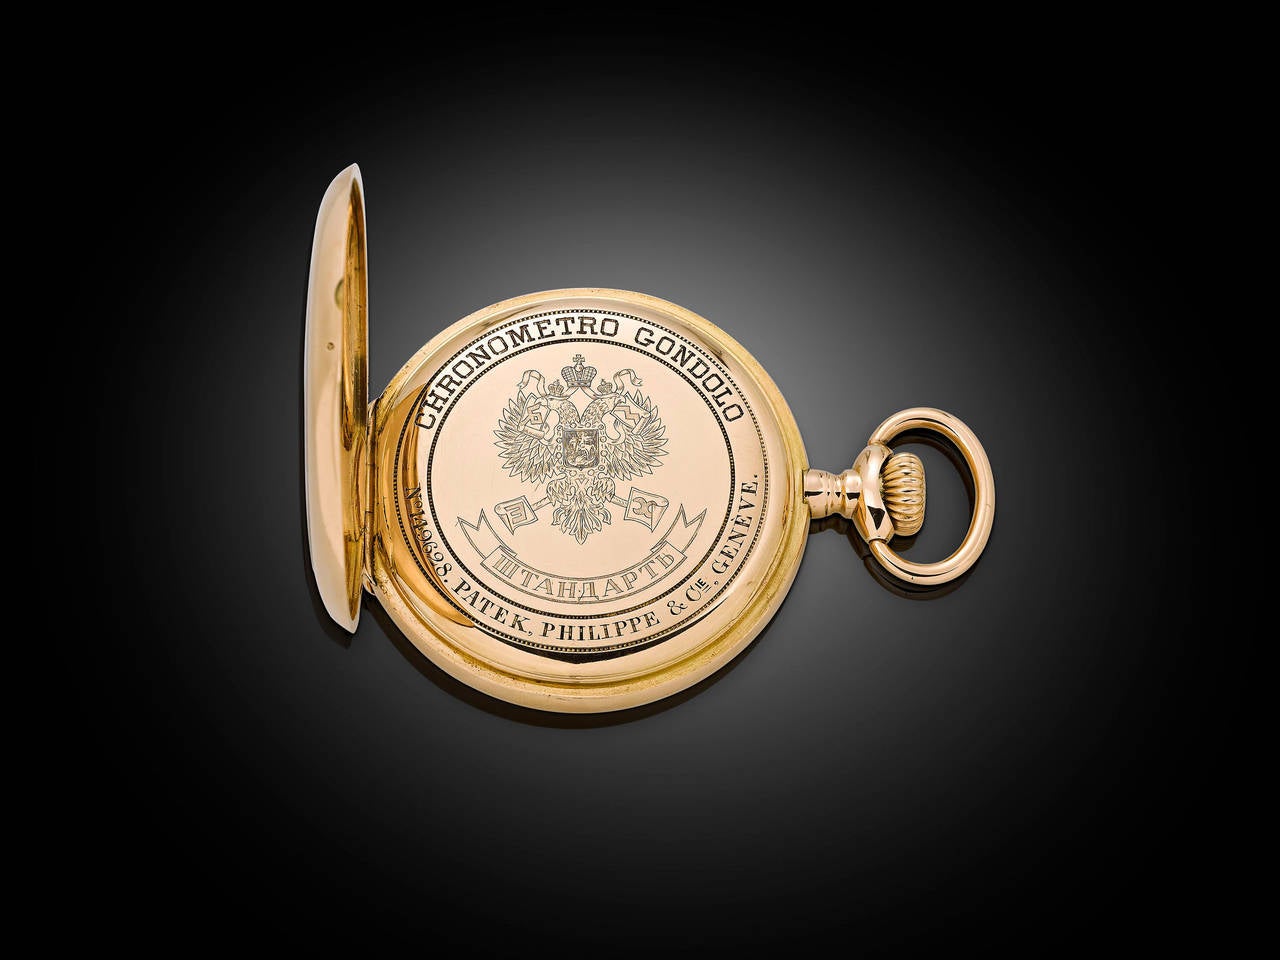 This extraordinarily rare Chronometro Gondolo pocket watch by Patek Philippe of Geneva boasts a remarkable history. Made for the family of Tsar Nicholas II – and perhaps for the Tsar himself – this fine timepiece is truly a one-of-a-kind piece of